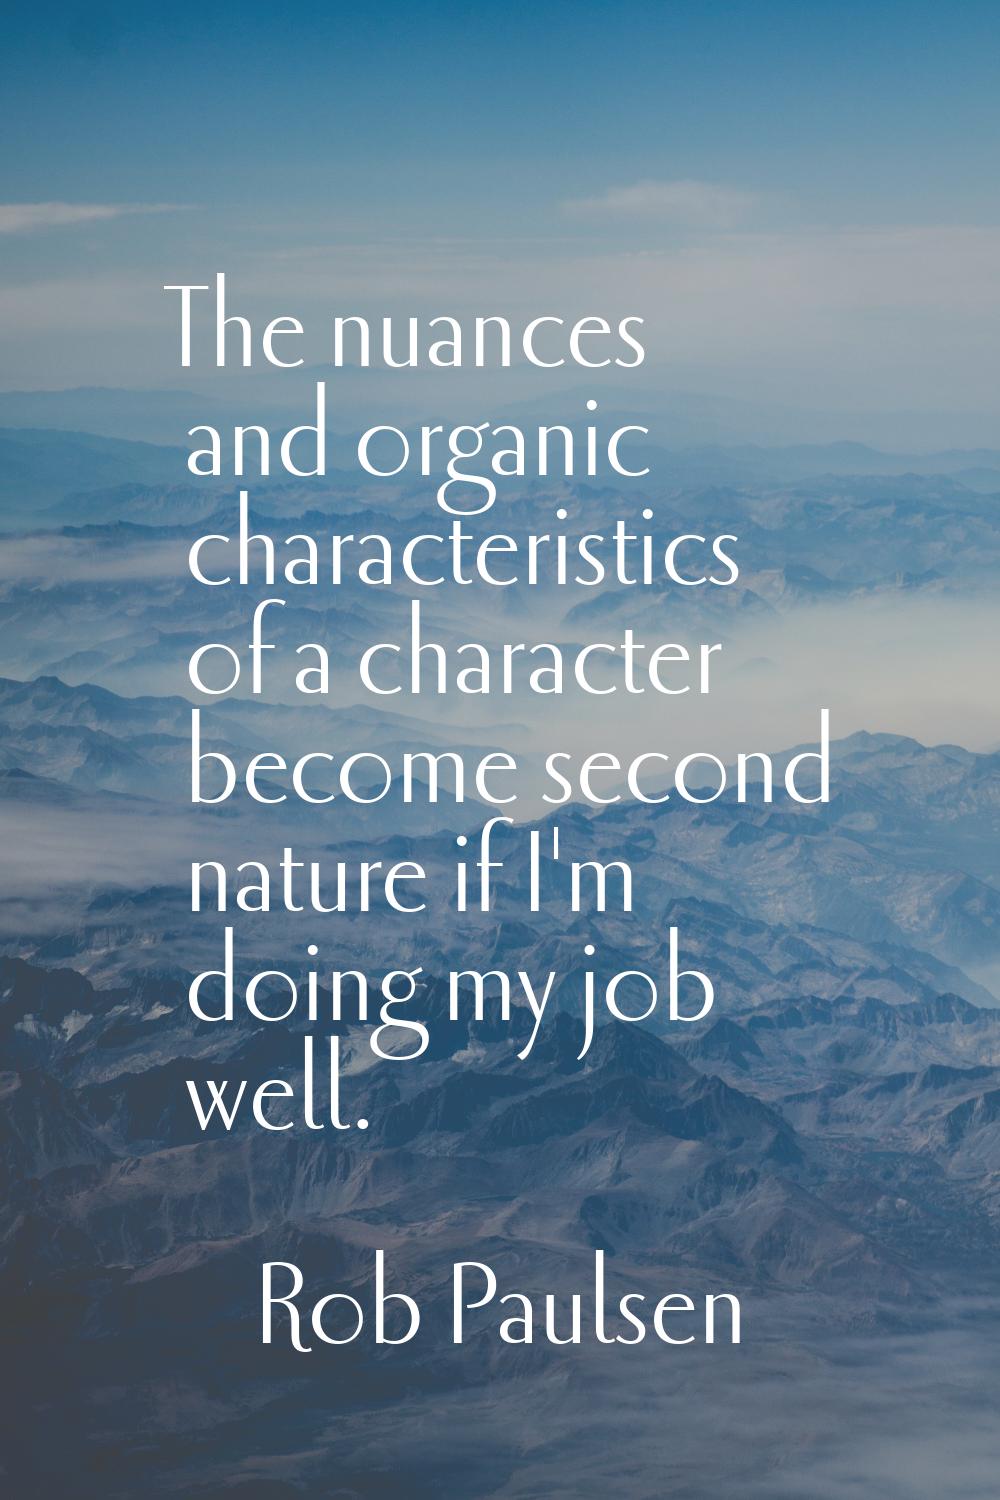 The nuances and organic characteristics of a character become second nature if I'm doing my job wel